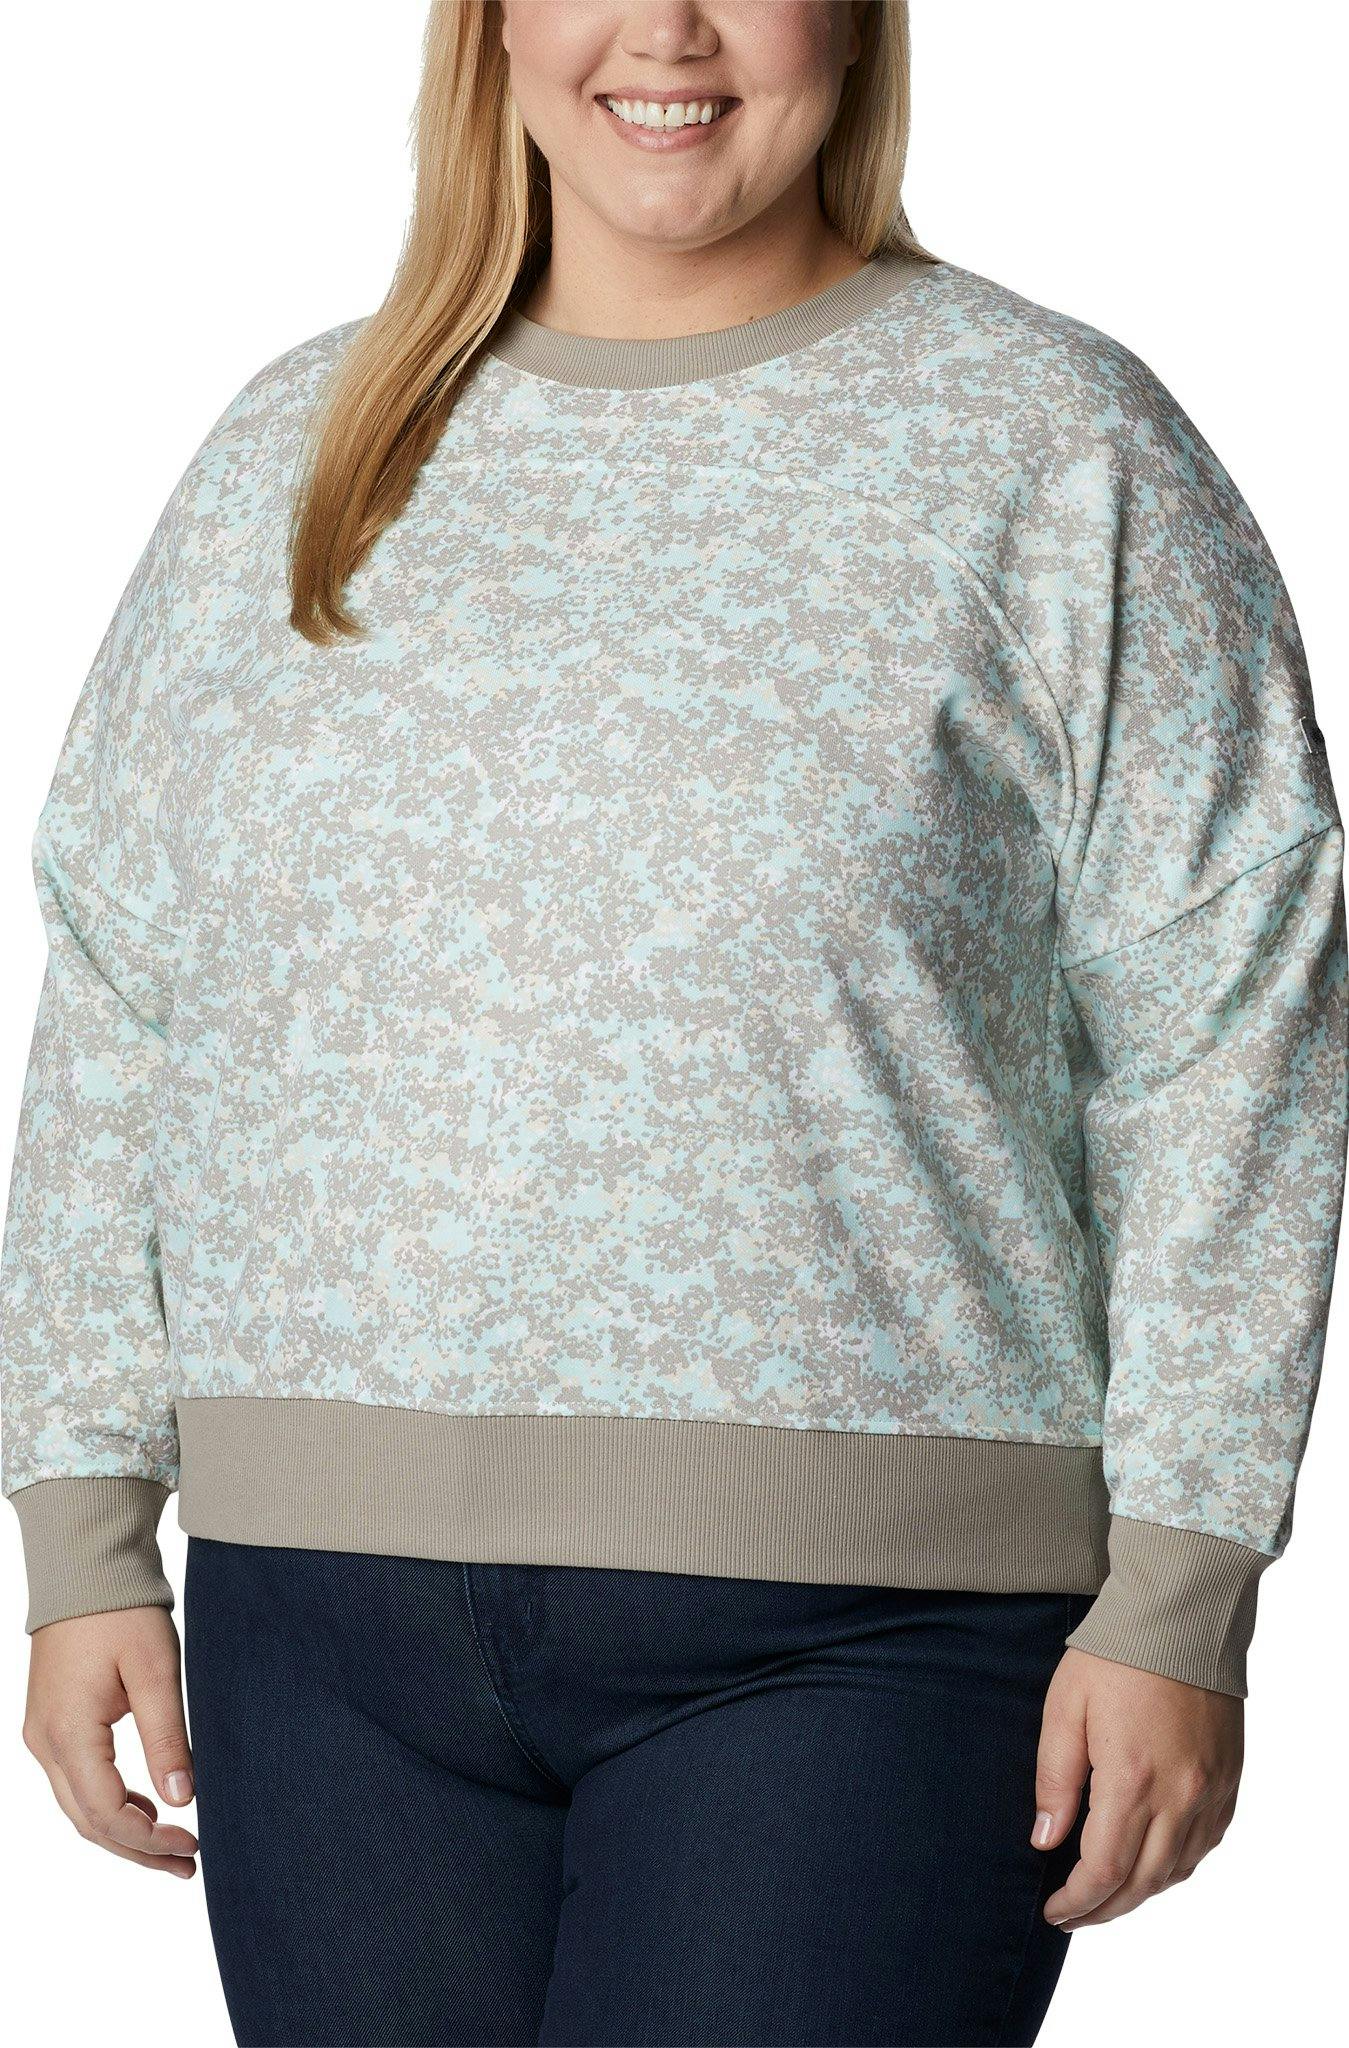 Product image for Columbia Lodge Plus Size French Terry Crew Neck Sweatshirt - Women's